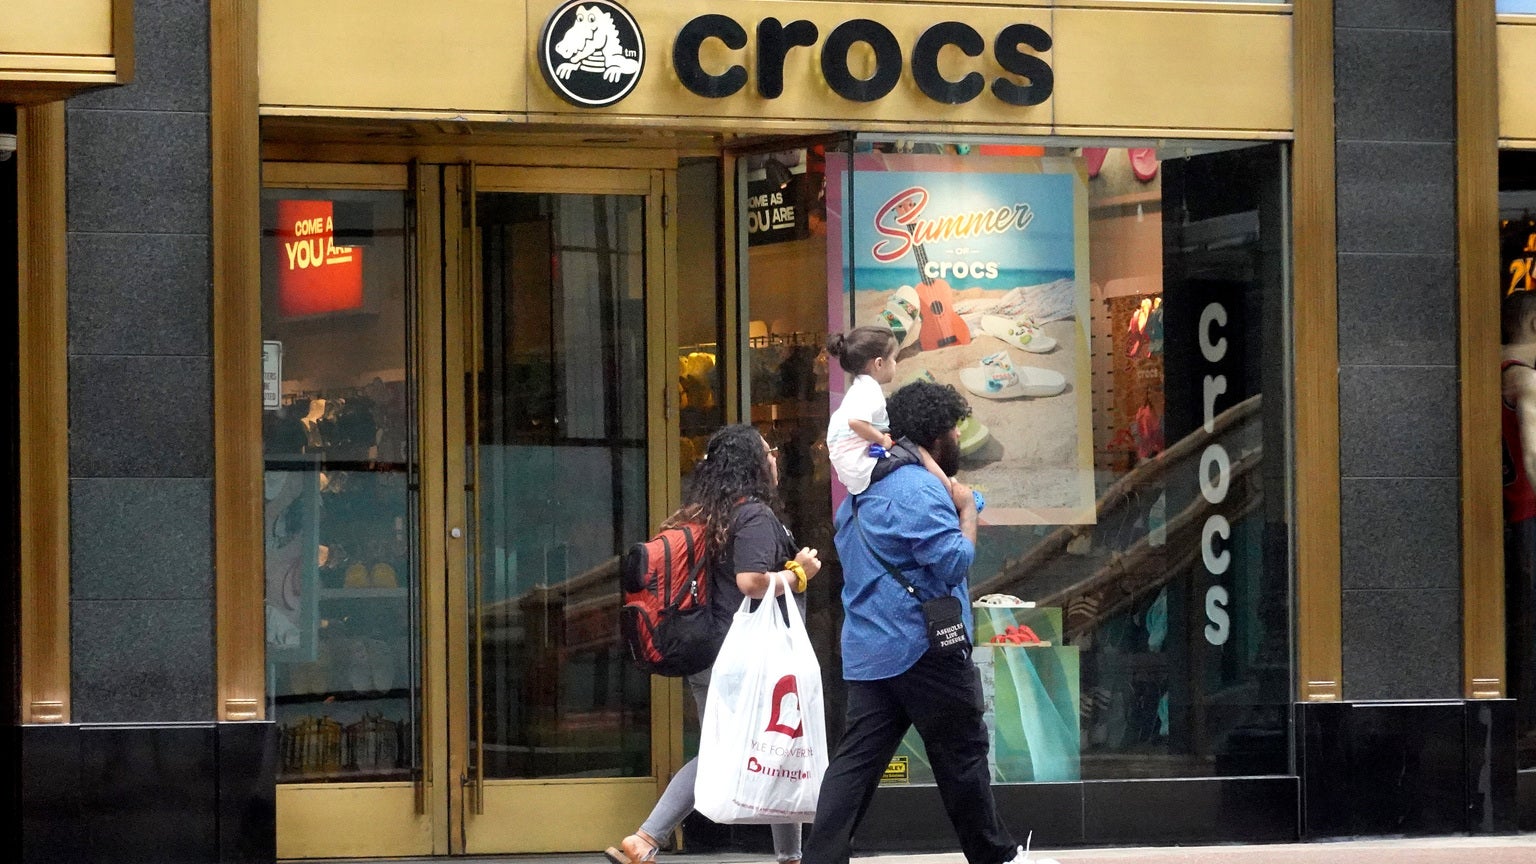 Slip Into Savings With Crocs Stock: Why This Undervalued Shoe Company Is A  Smart Buy | Seeking Alpha